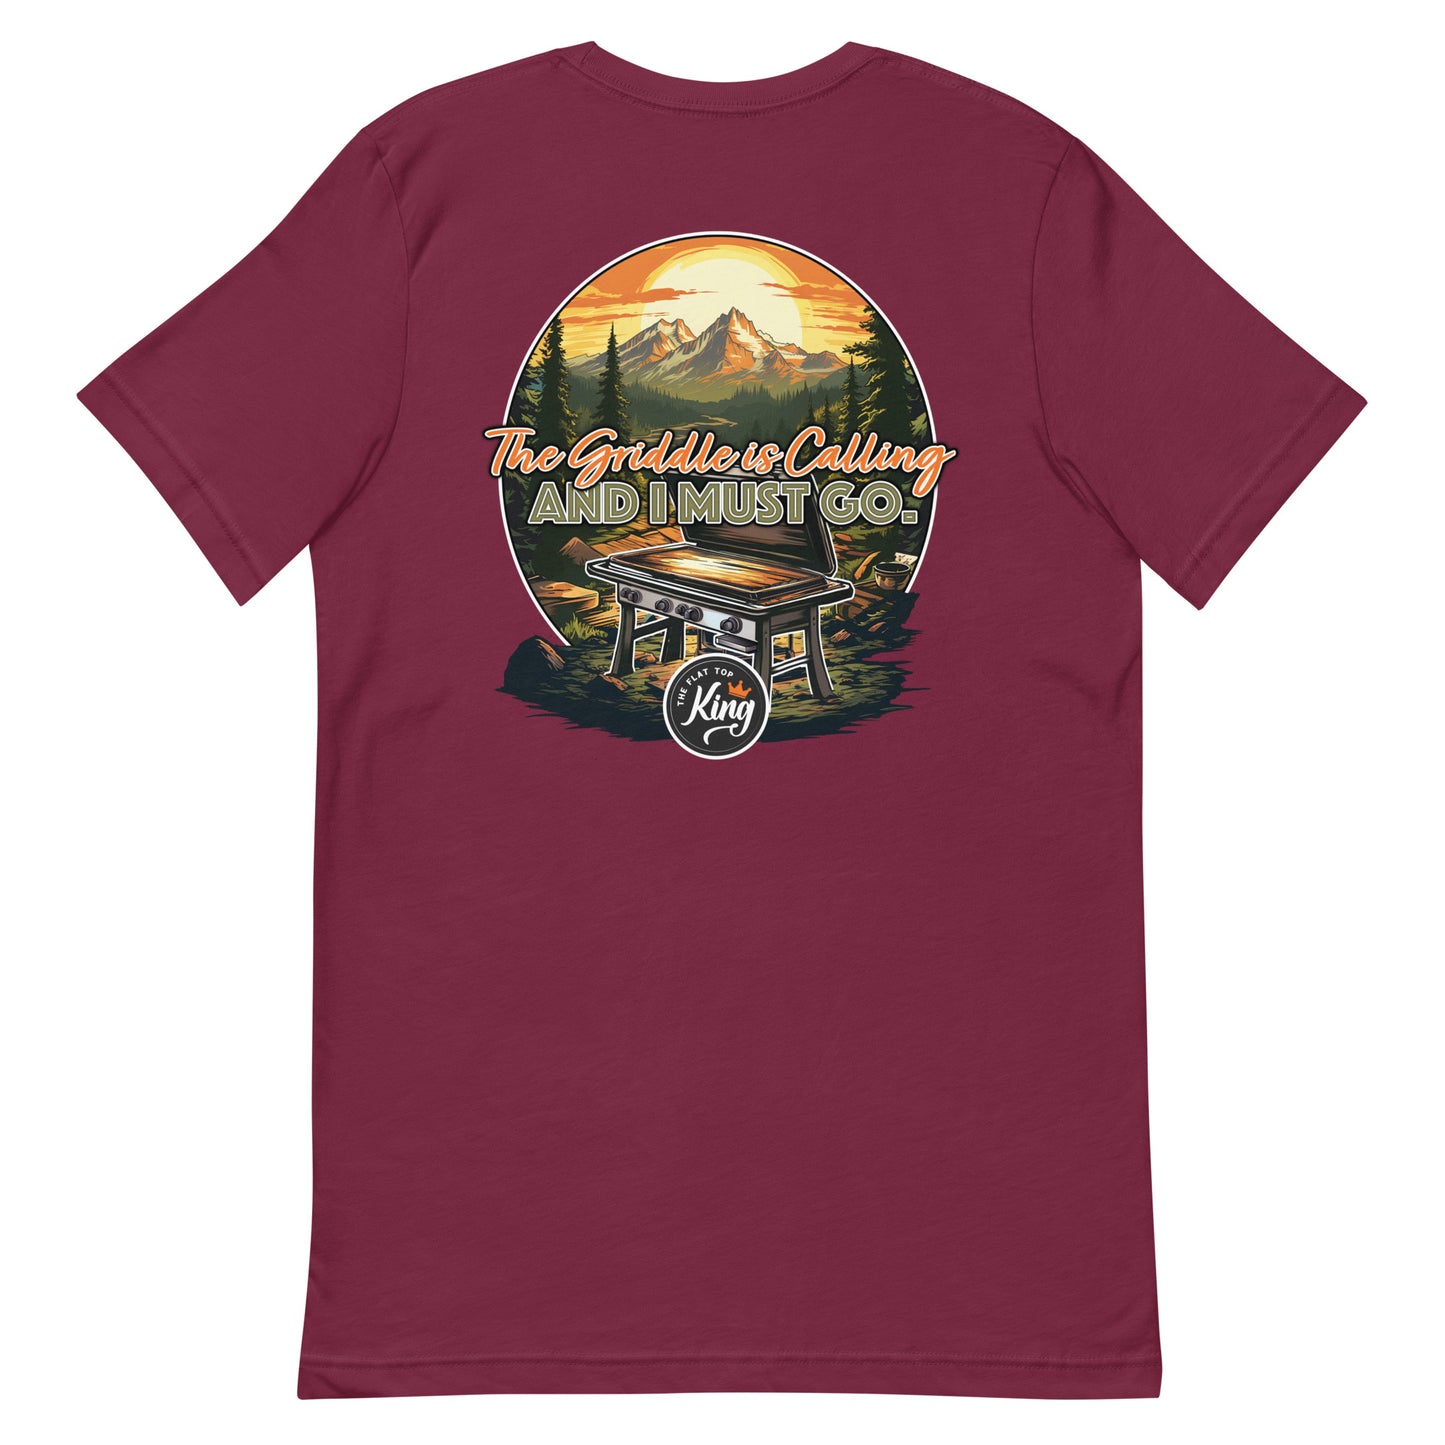 "The Griddle is Calling" Shirt